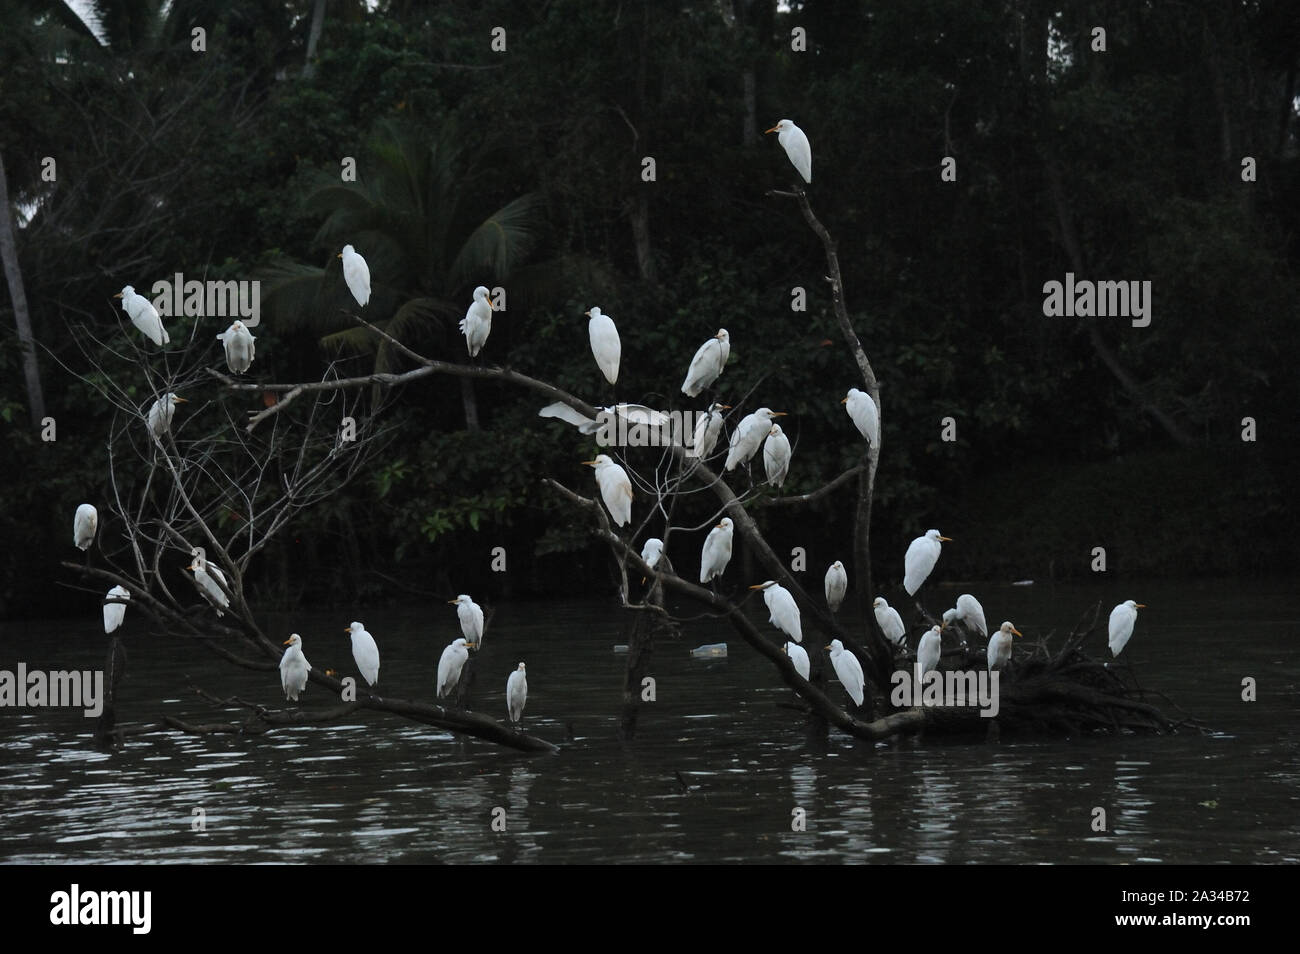 Alleppey, kerala, india - Southeast Asia - Birds Flock of Great Cattle Egret Sitting on Tree The cattle egret is a cosmopolitan species of heron. Stock Photo